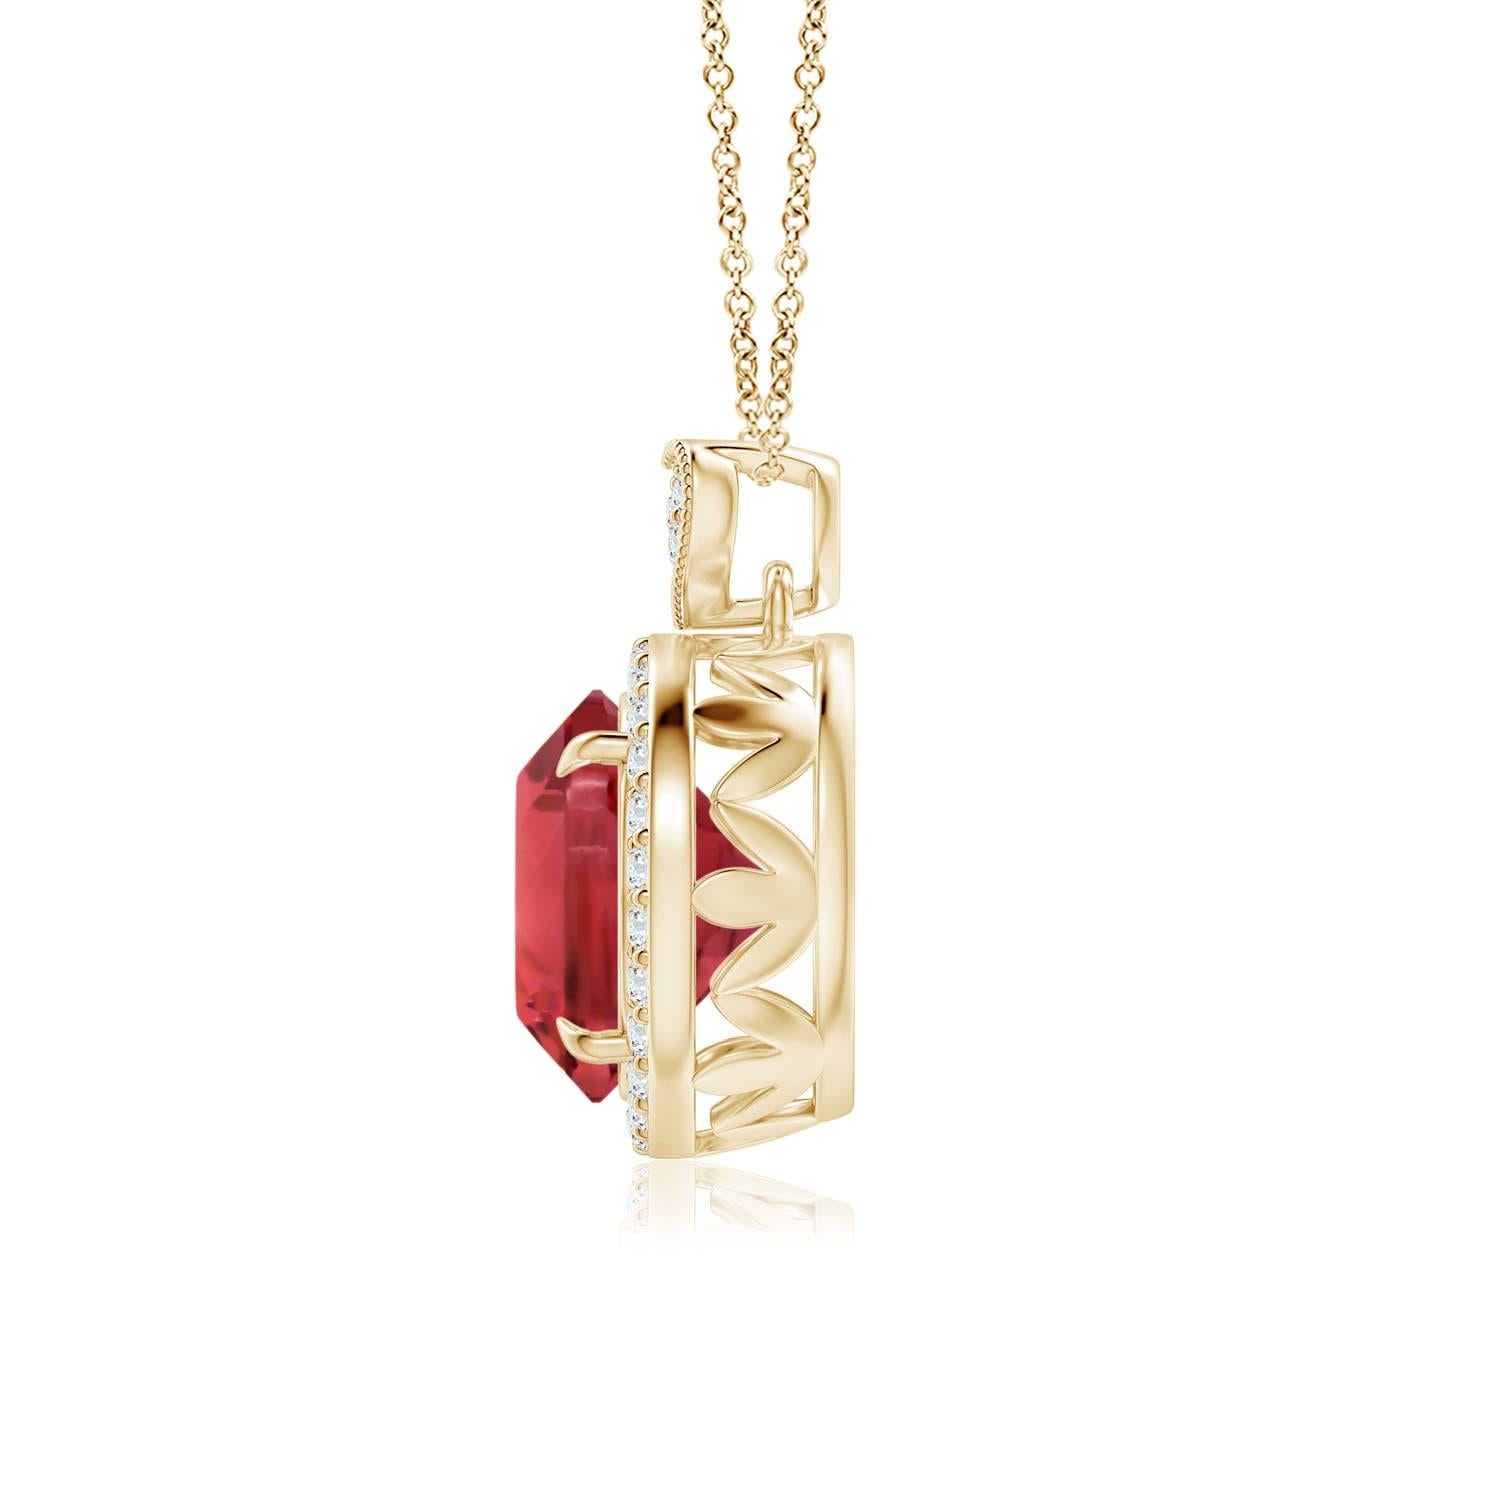 Embrace your romantic side with this charming pink tourmaline pendant, crafted in 14k yellow gold. The GIA certified pink tourmaline is claw-set within a halo of sparkling diamonds. It is topped with a diamond-encrusted heart-shaped bale, fringed